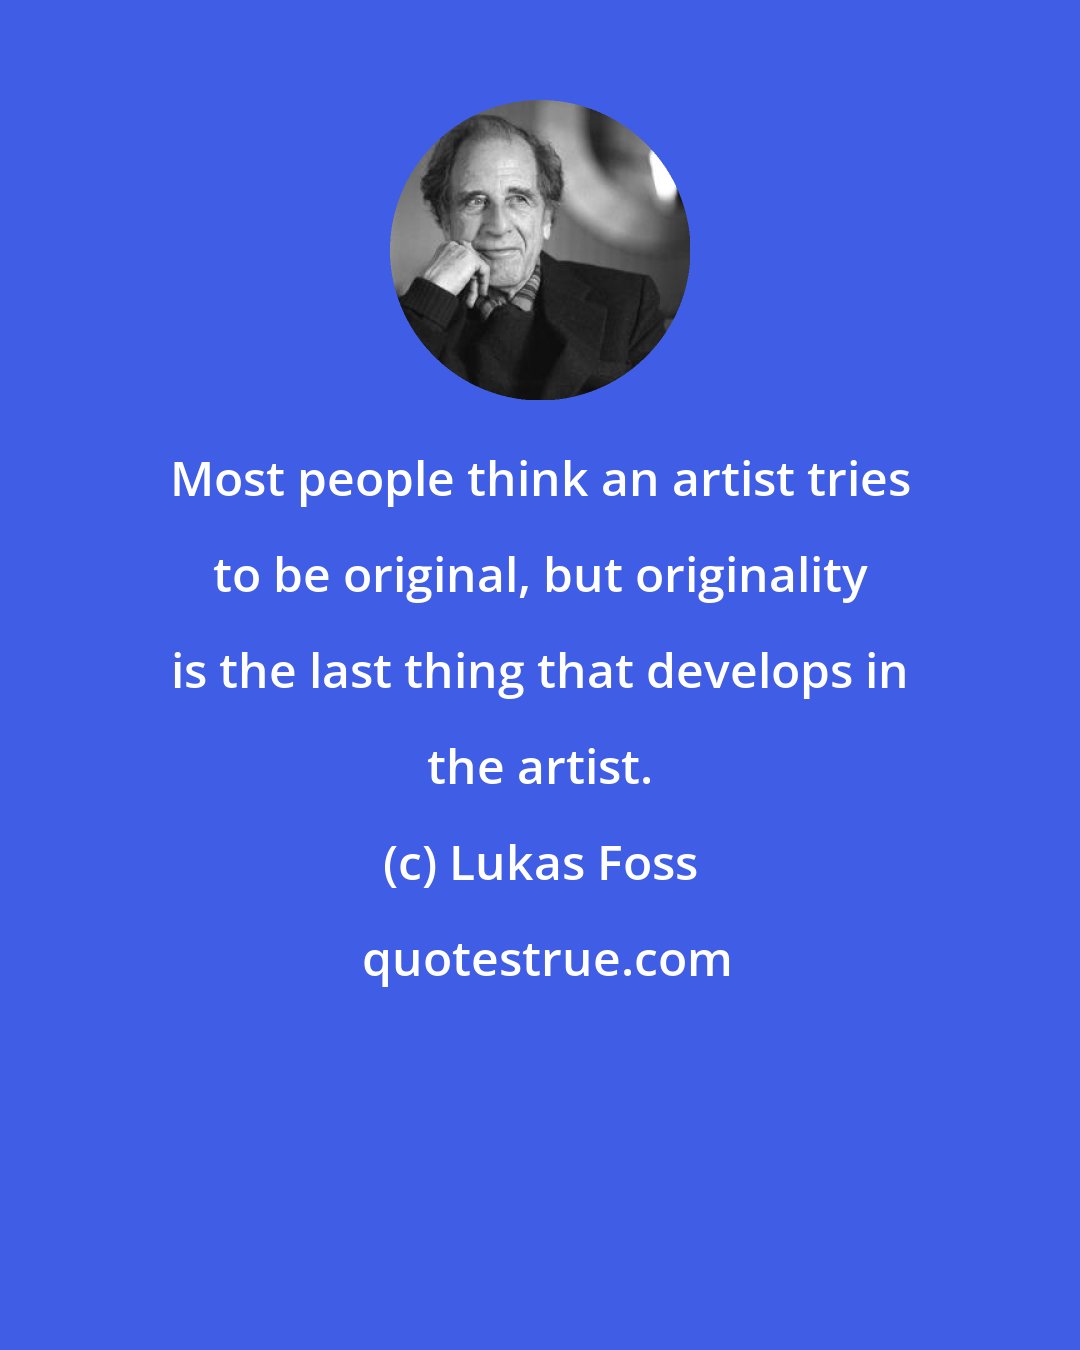 Lukas Foss: Most people think an artist tries to be original, but originality is the last thing that develops in the artist.